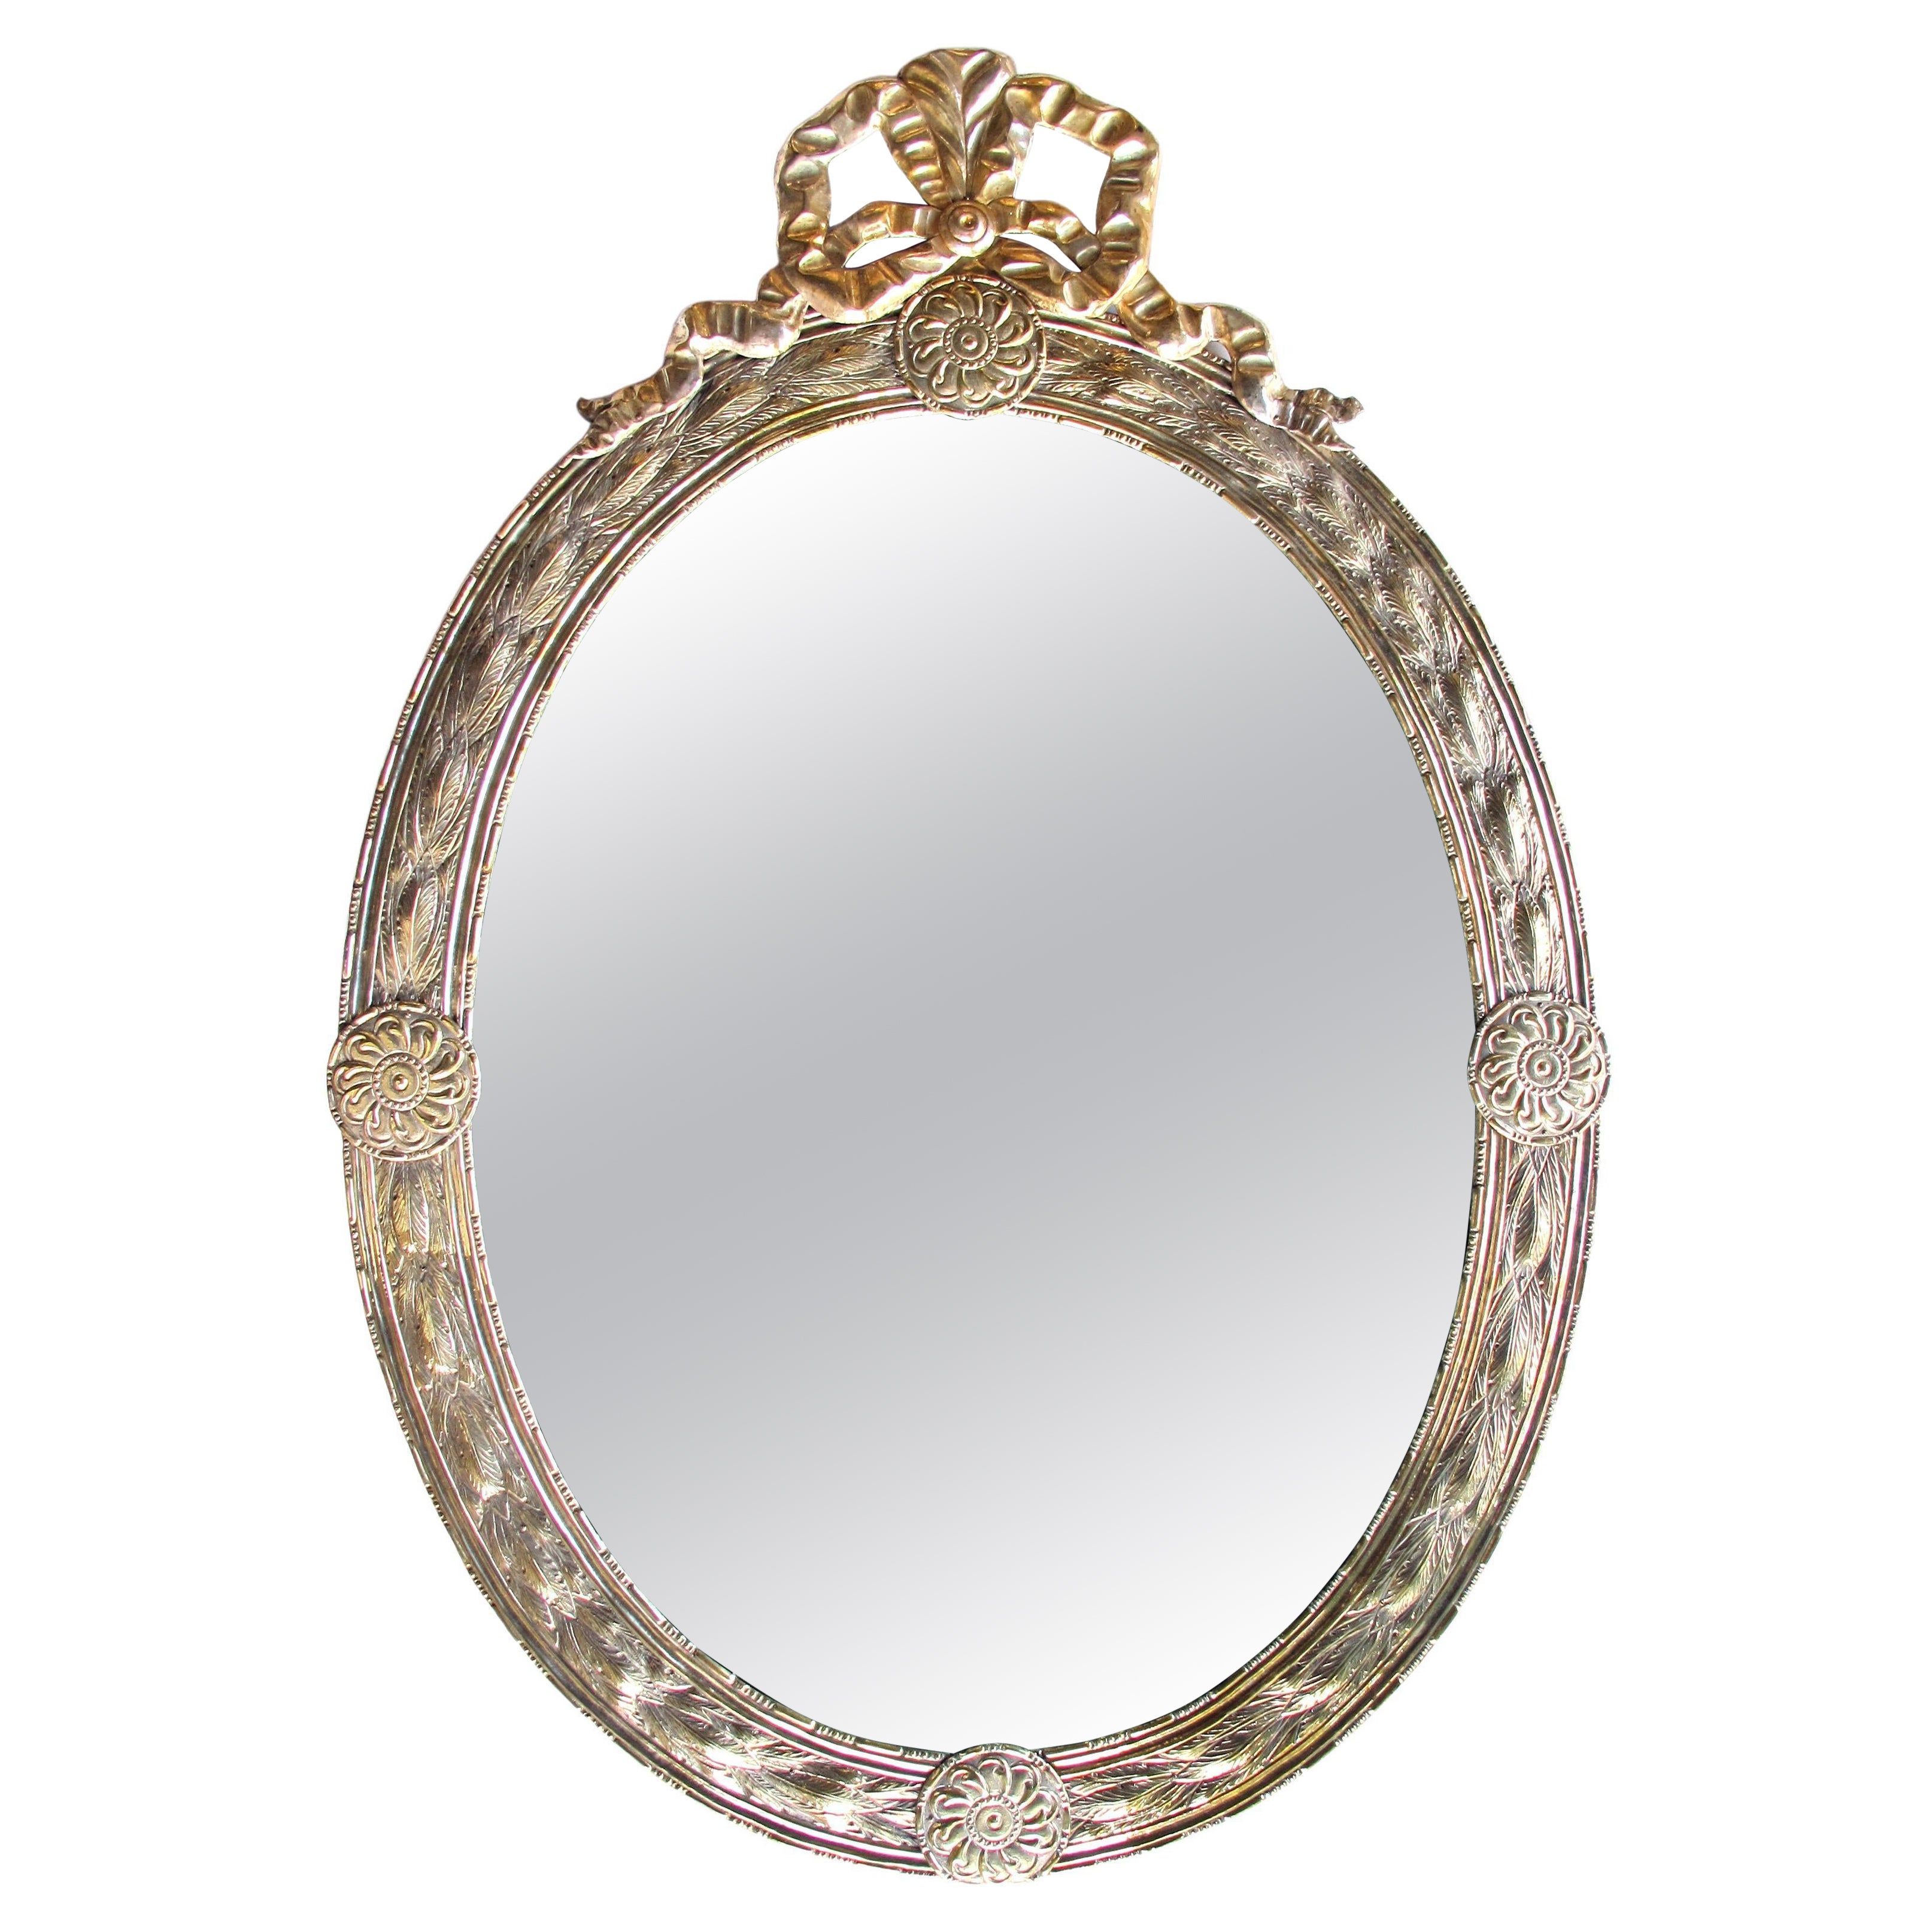 Large Dutch Neoclassical Style Silver and Gold Gilt Repoussé Oval Mirror